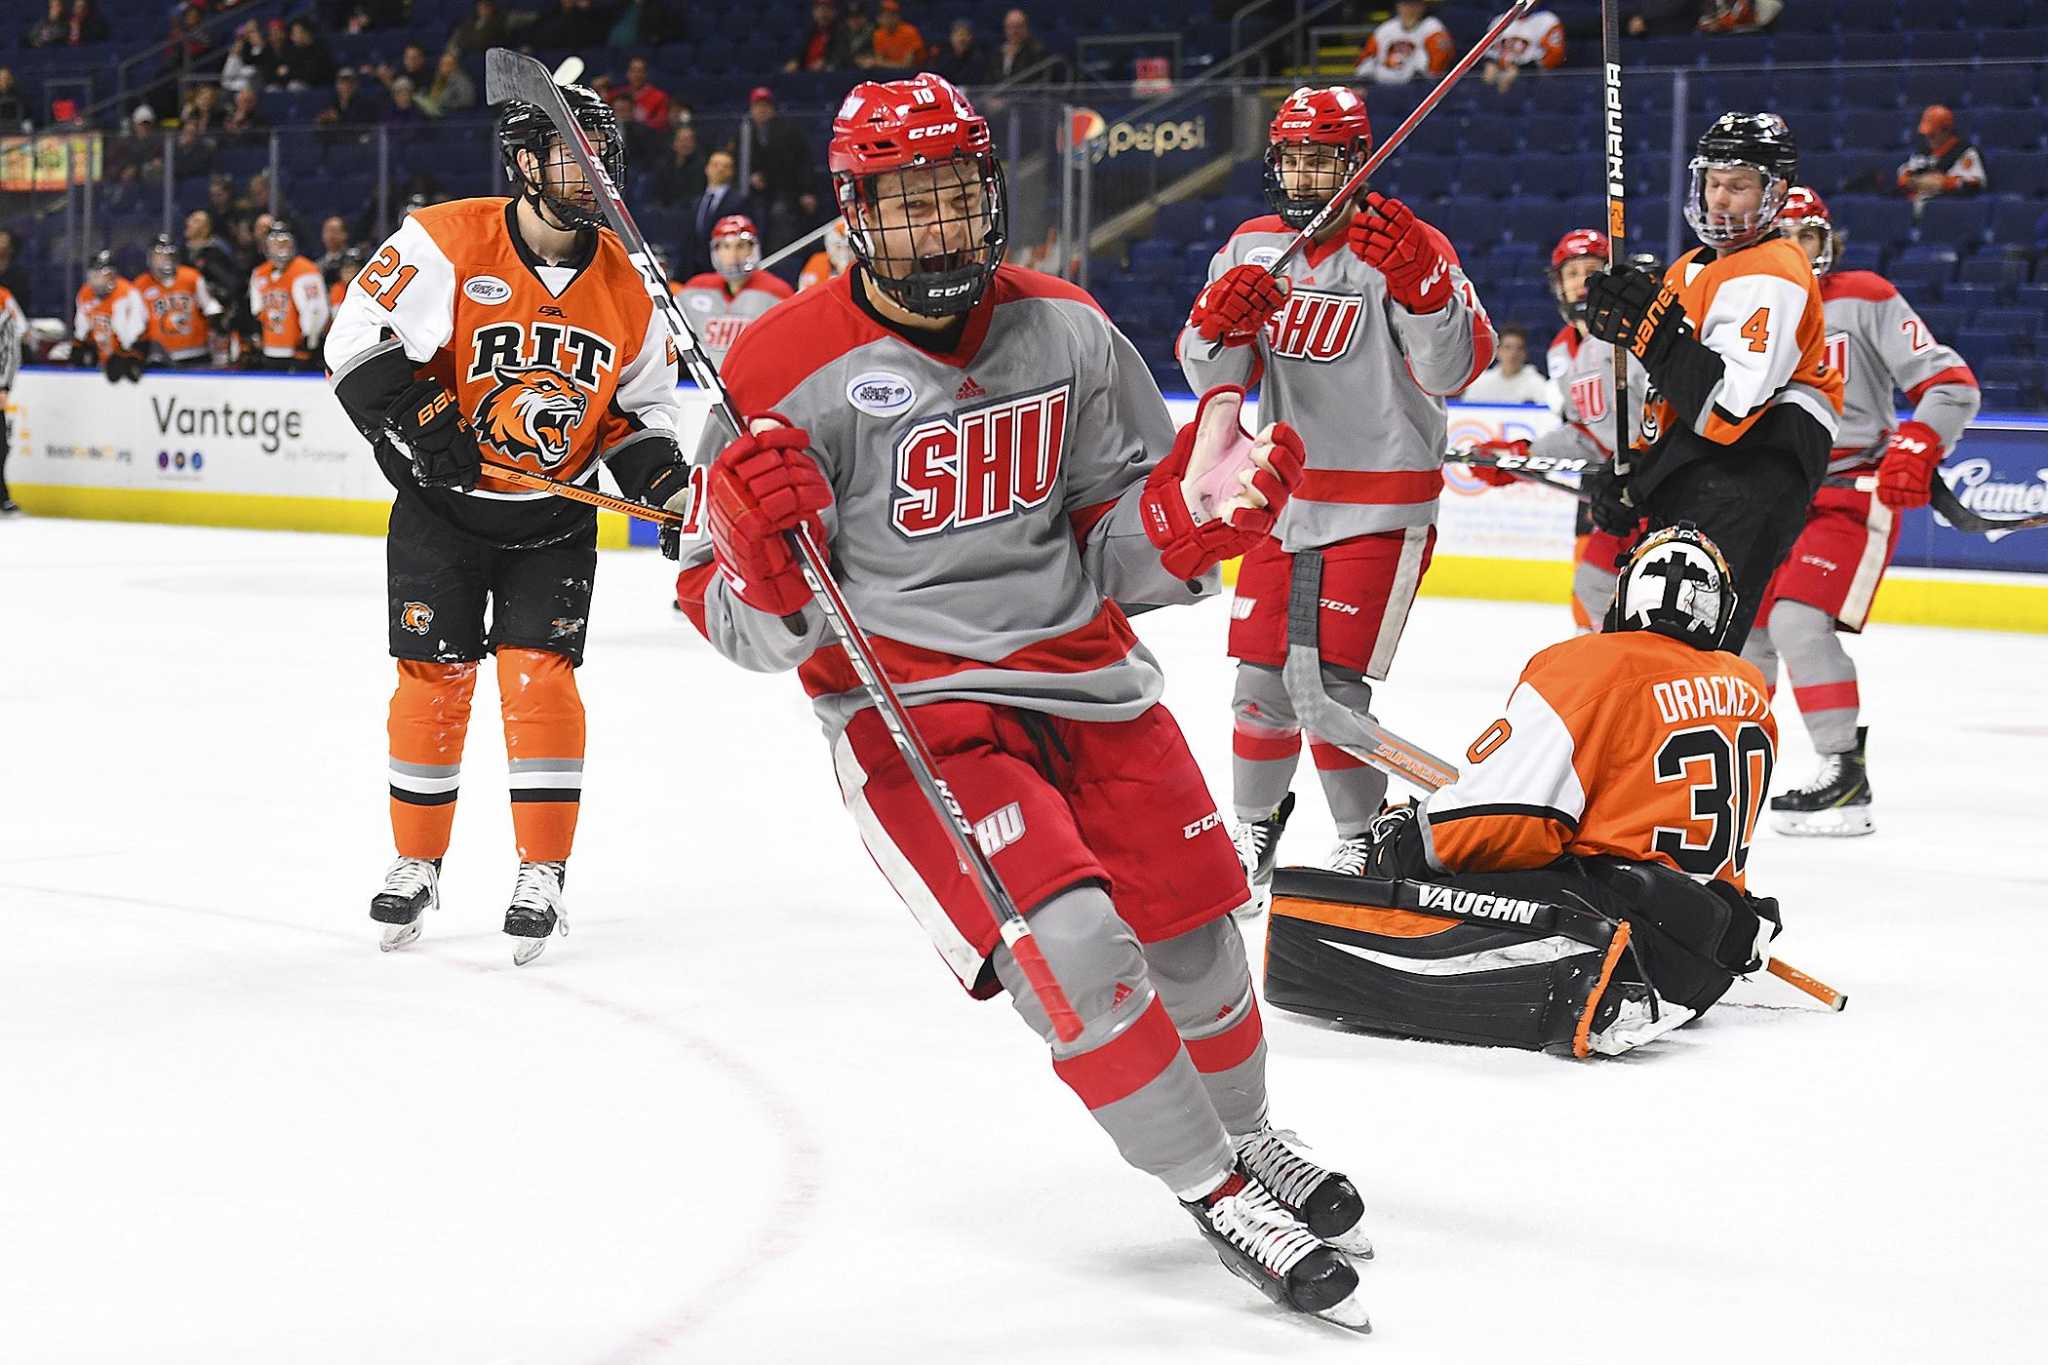 Sacred Heart Dumps RIT in Playoff Domination - Inside Hockey